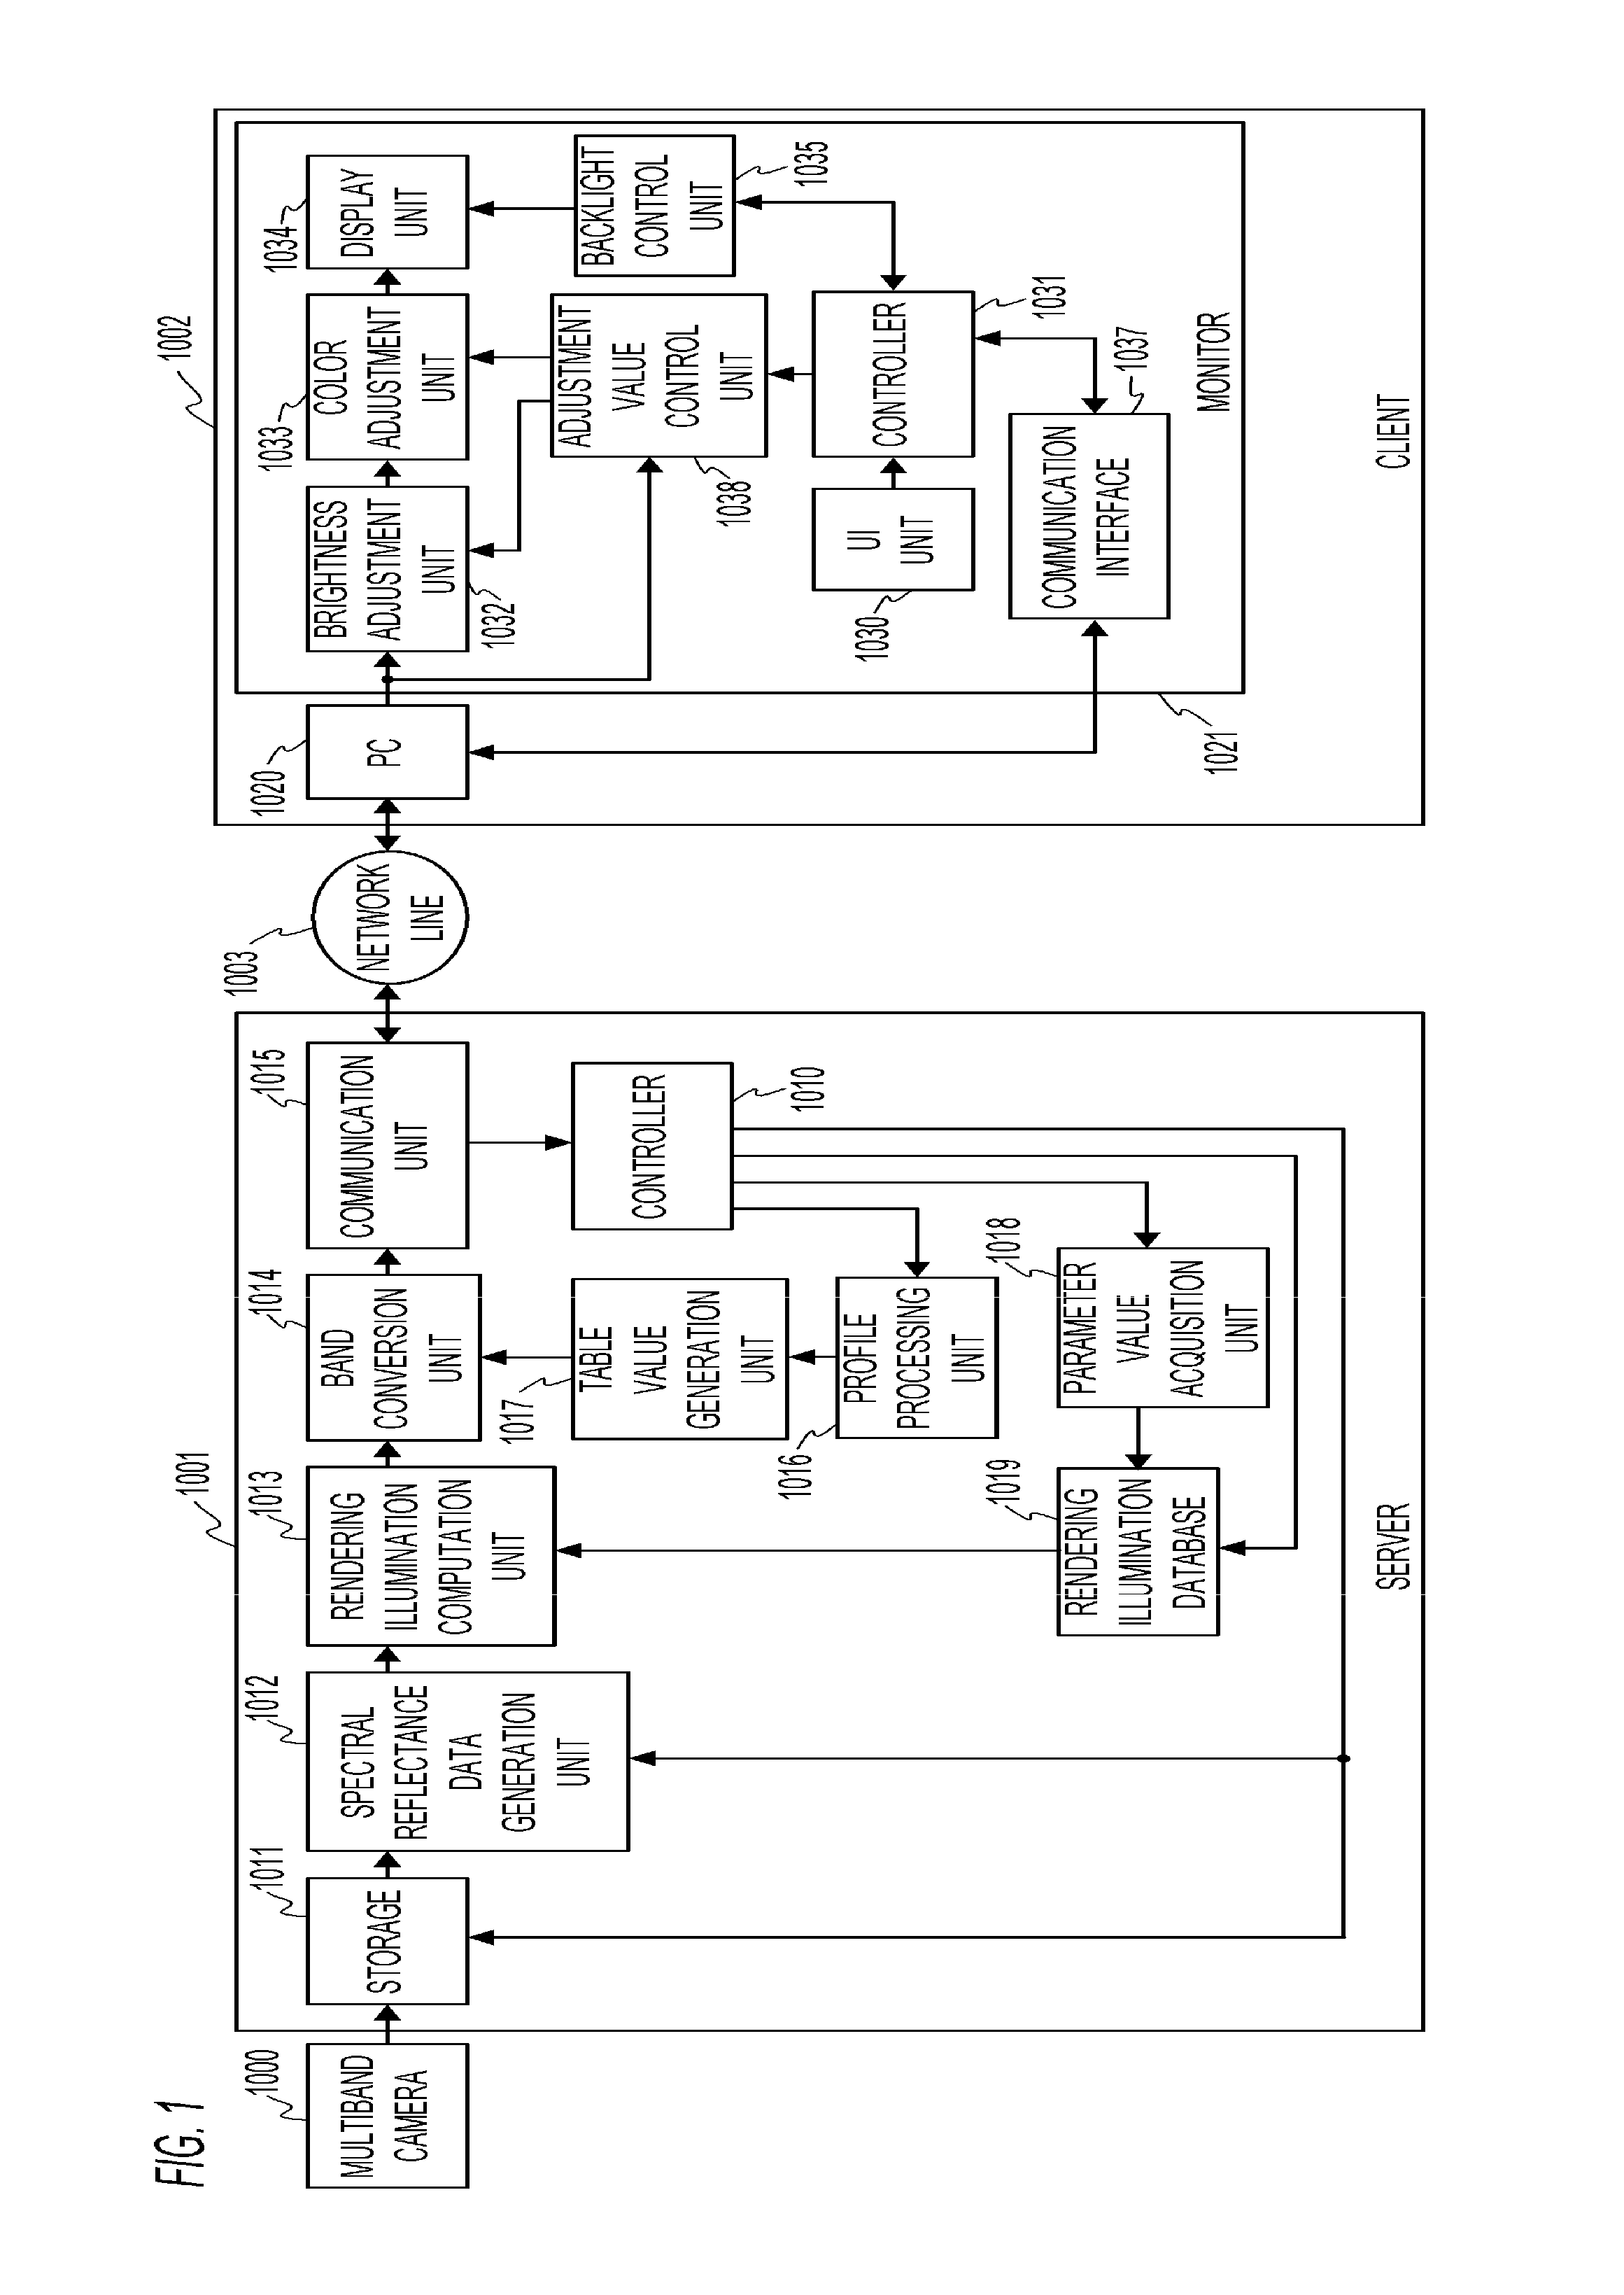 Image display system and control method therefor